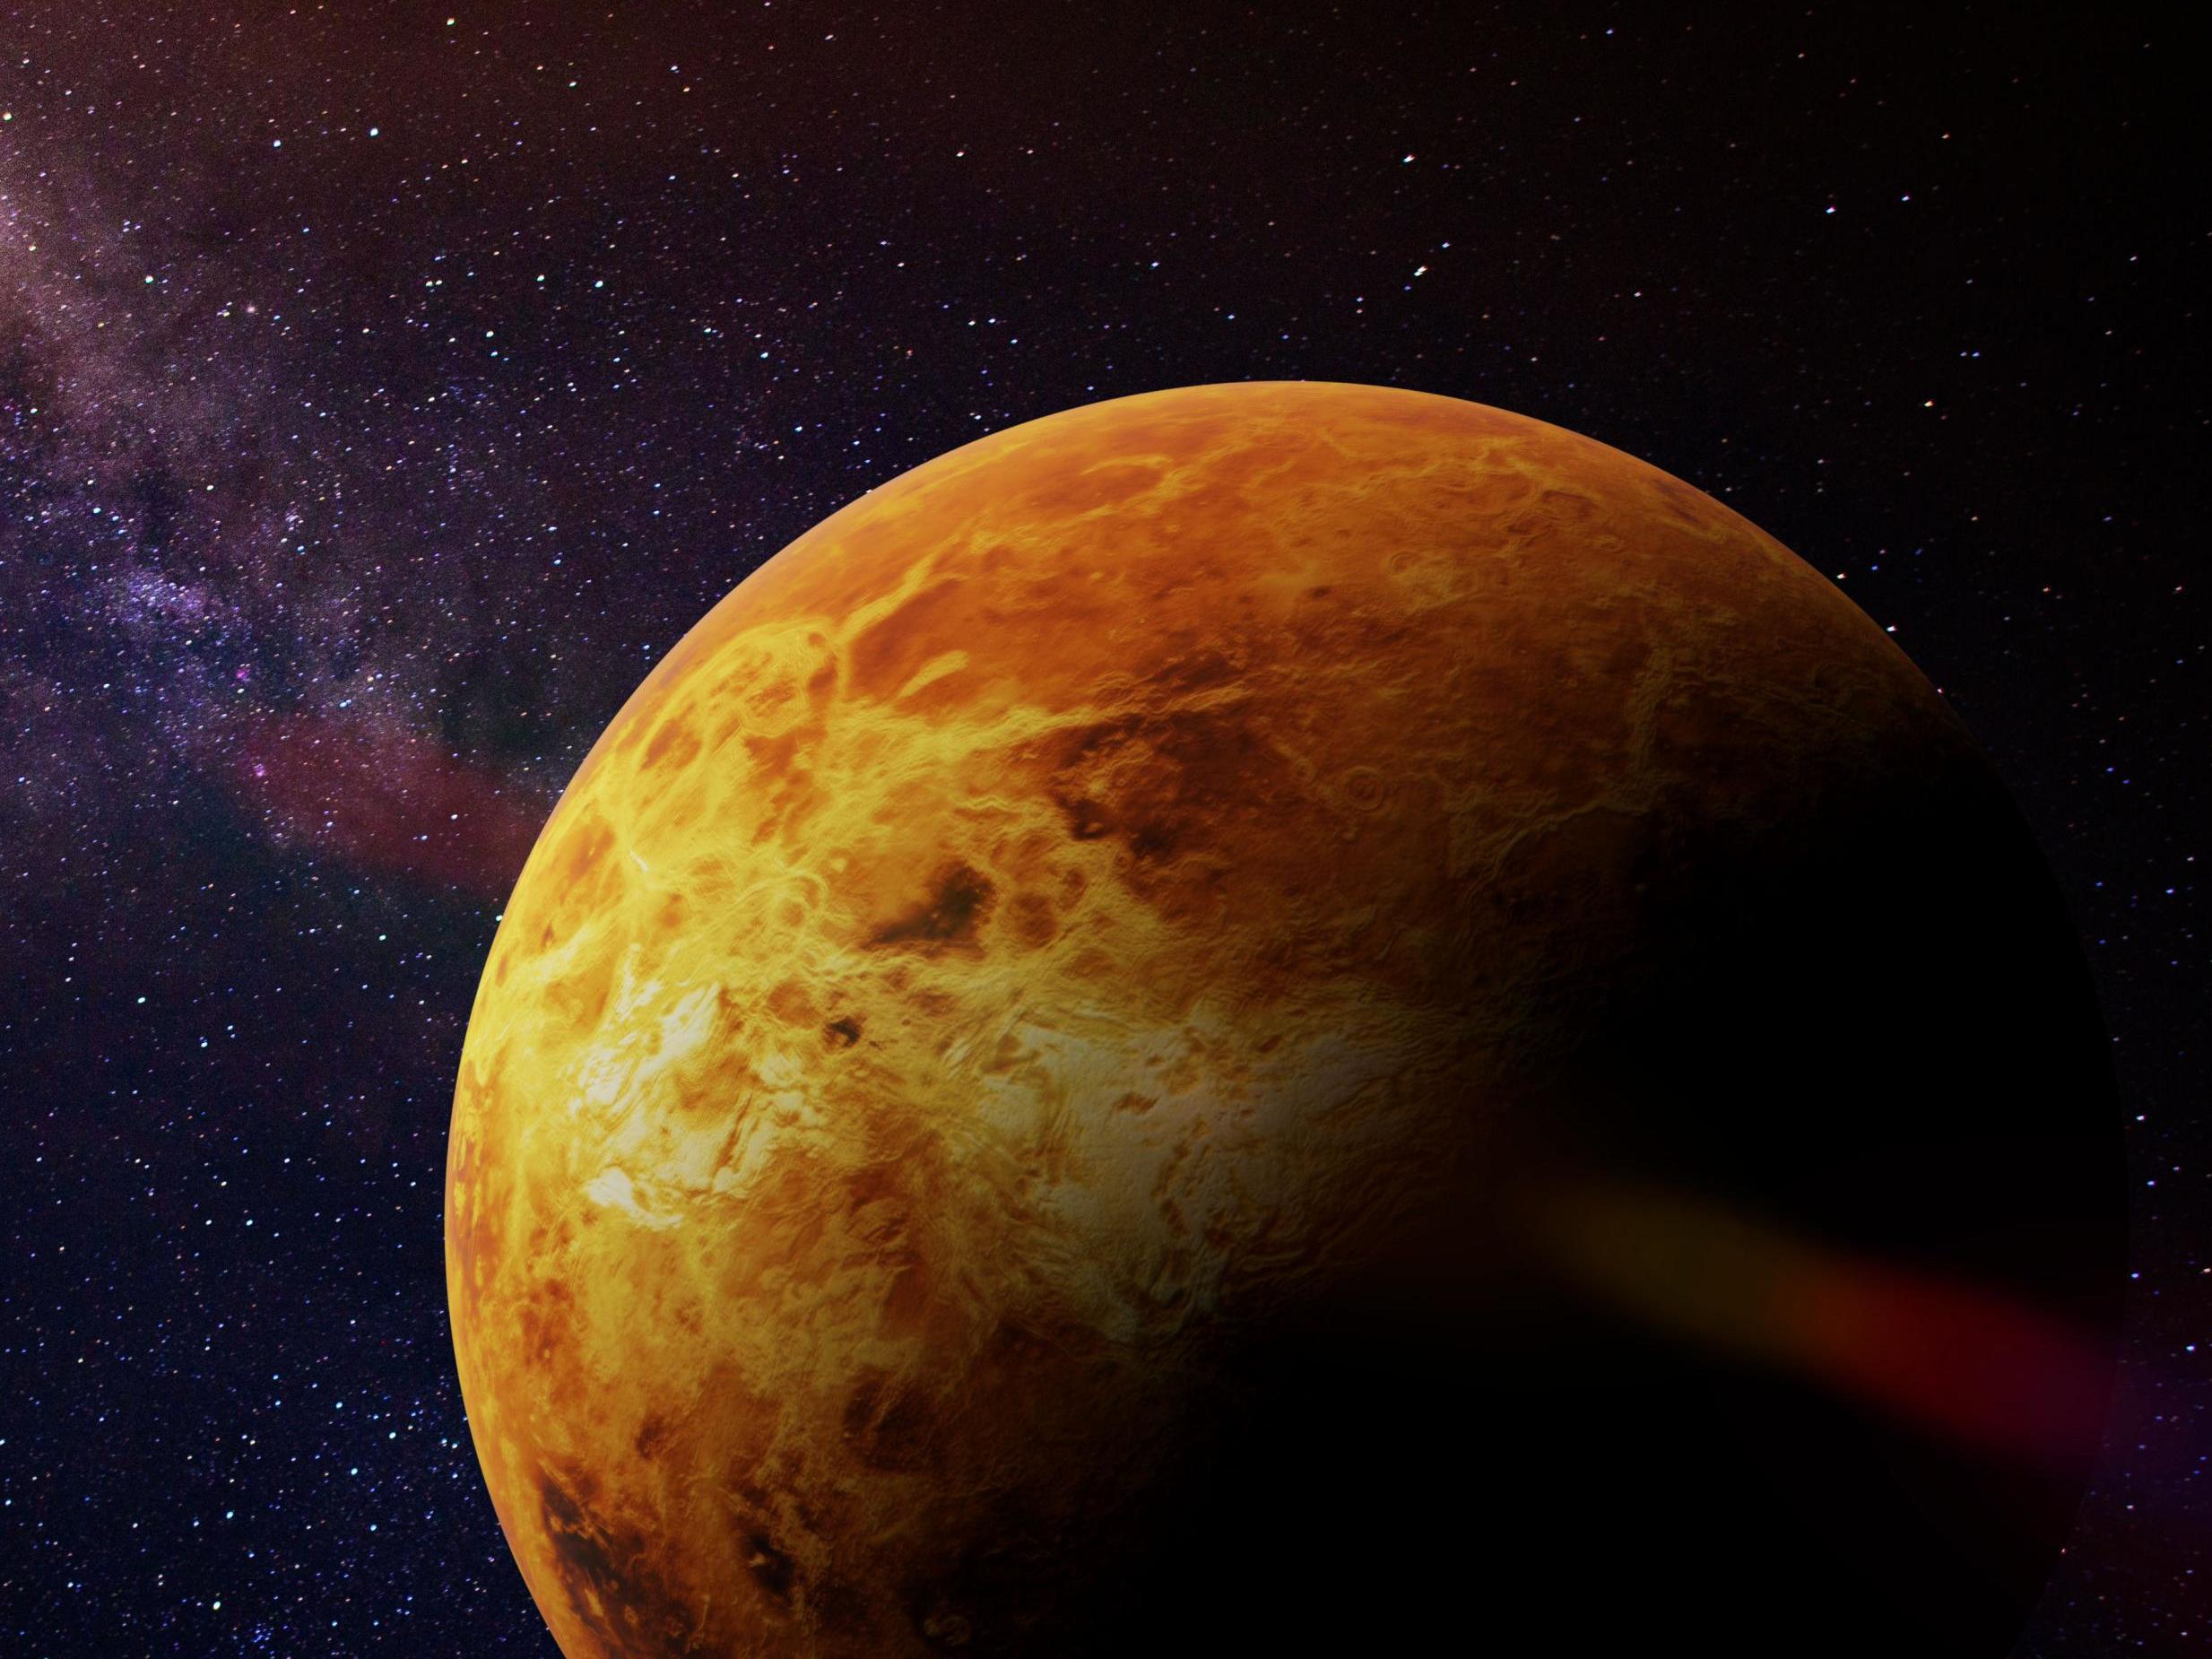 The surface temperature of Venus can melt lead